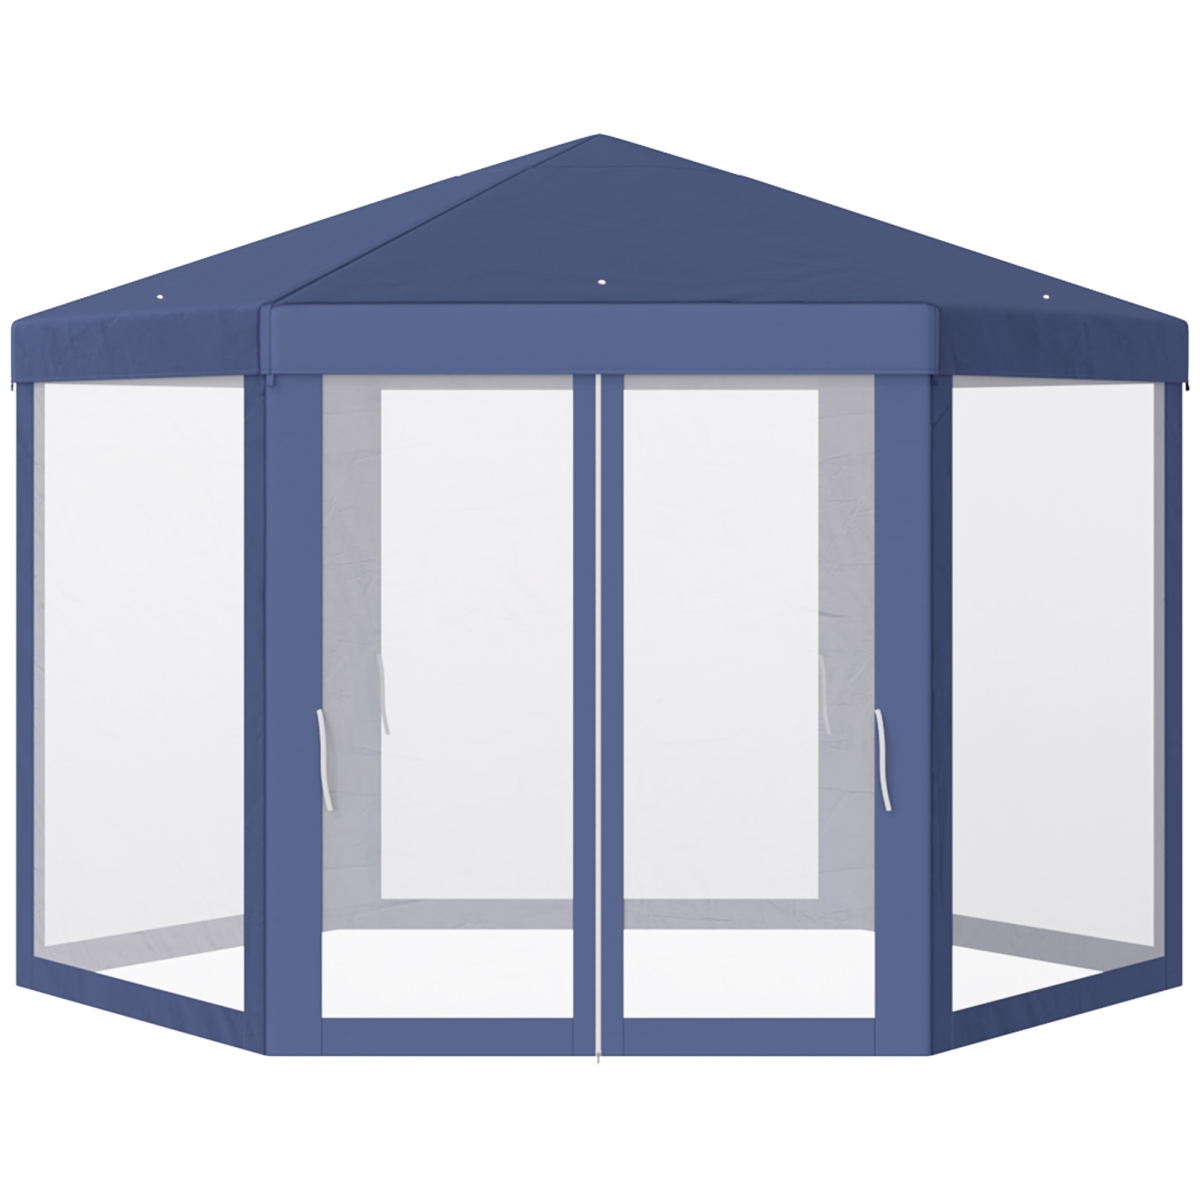 212 Main 84C-044BU 13 x 13 ft. Outsunny Outdoor Party Tent Hexagon Sun Shelter Canopy with Protective Mesh Screen Walls & Proper Sun Prot